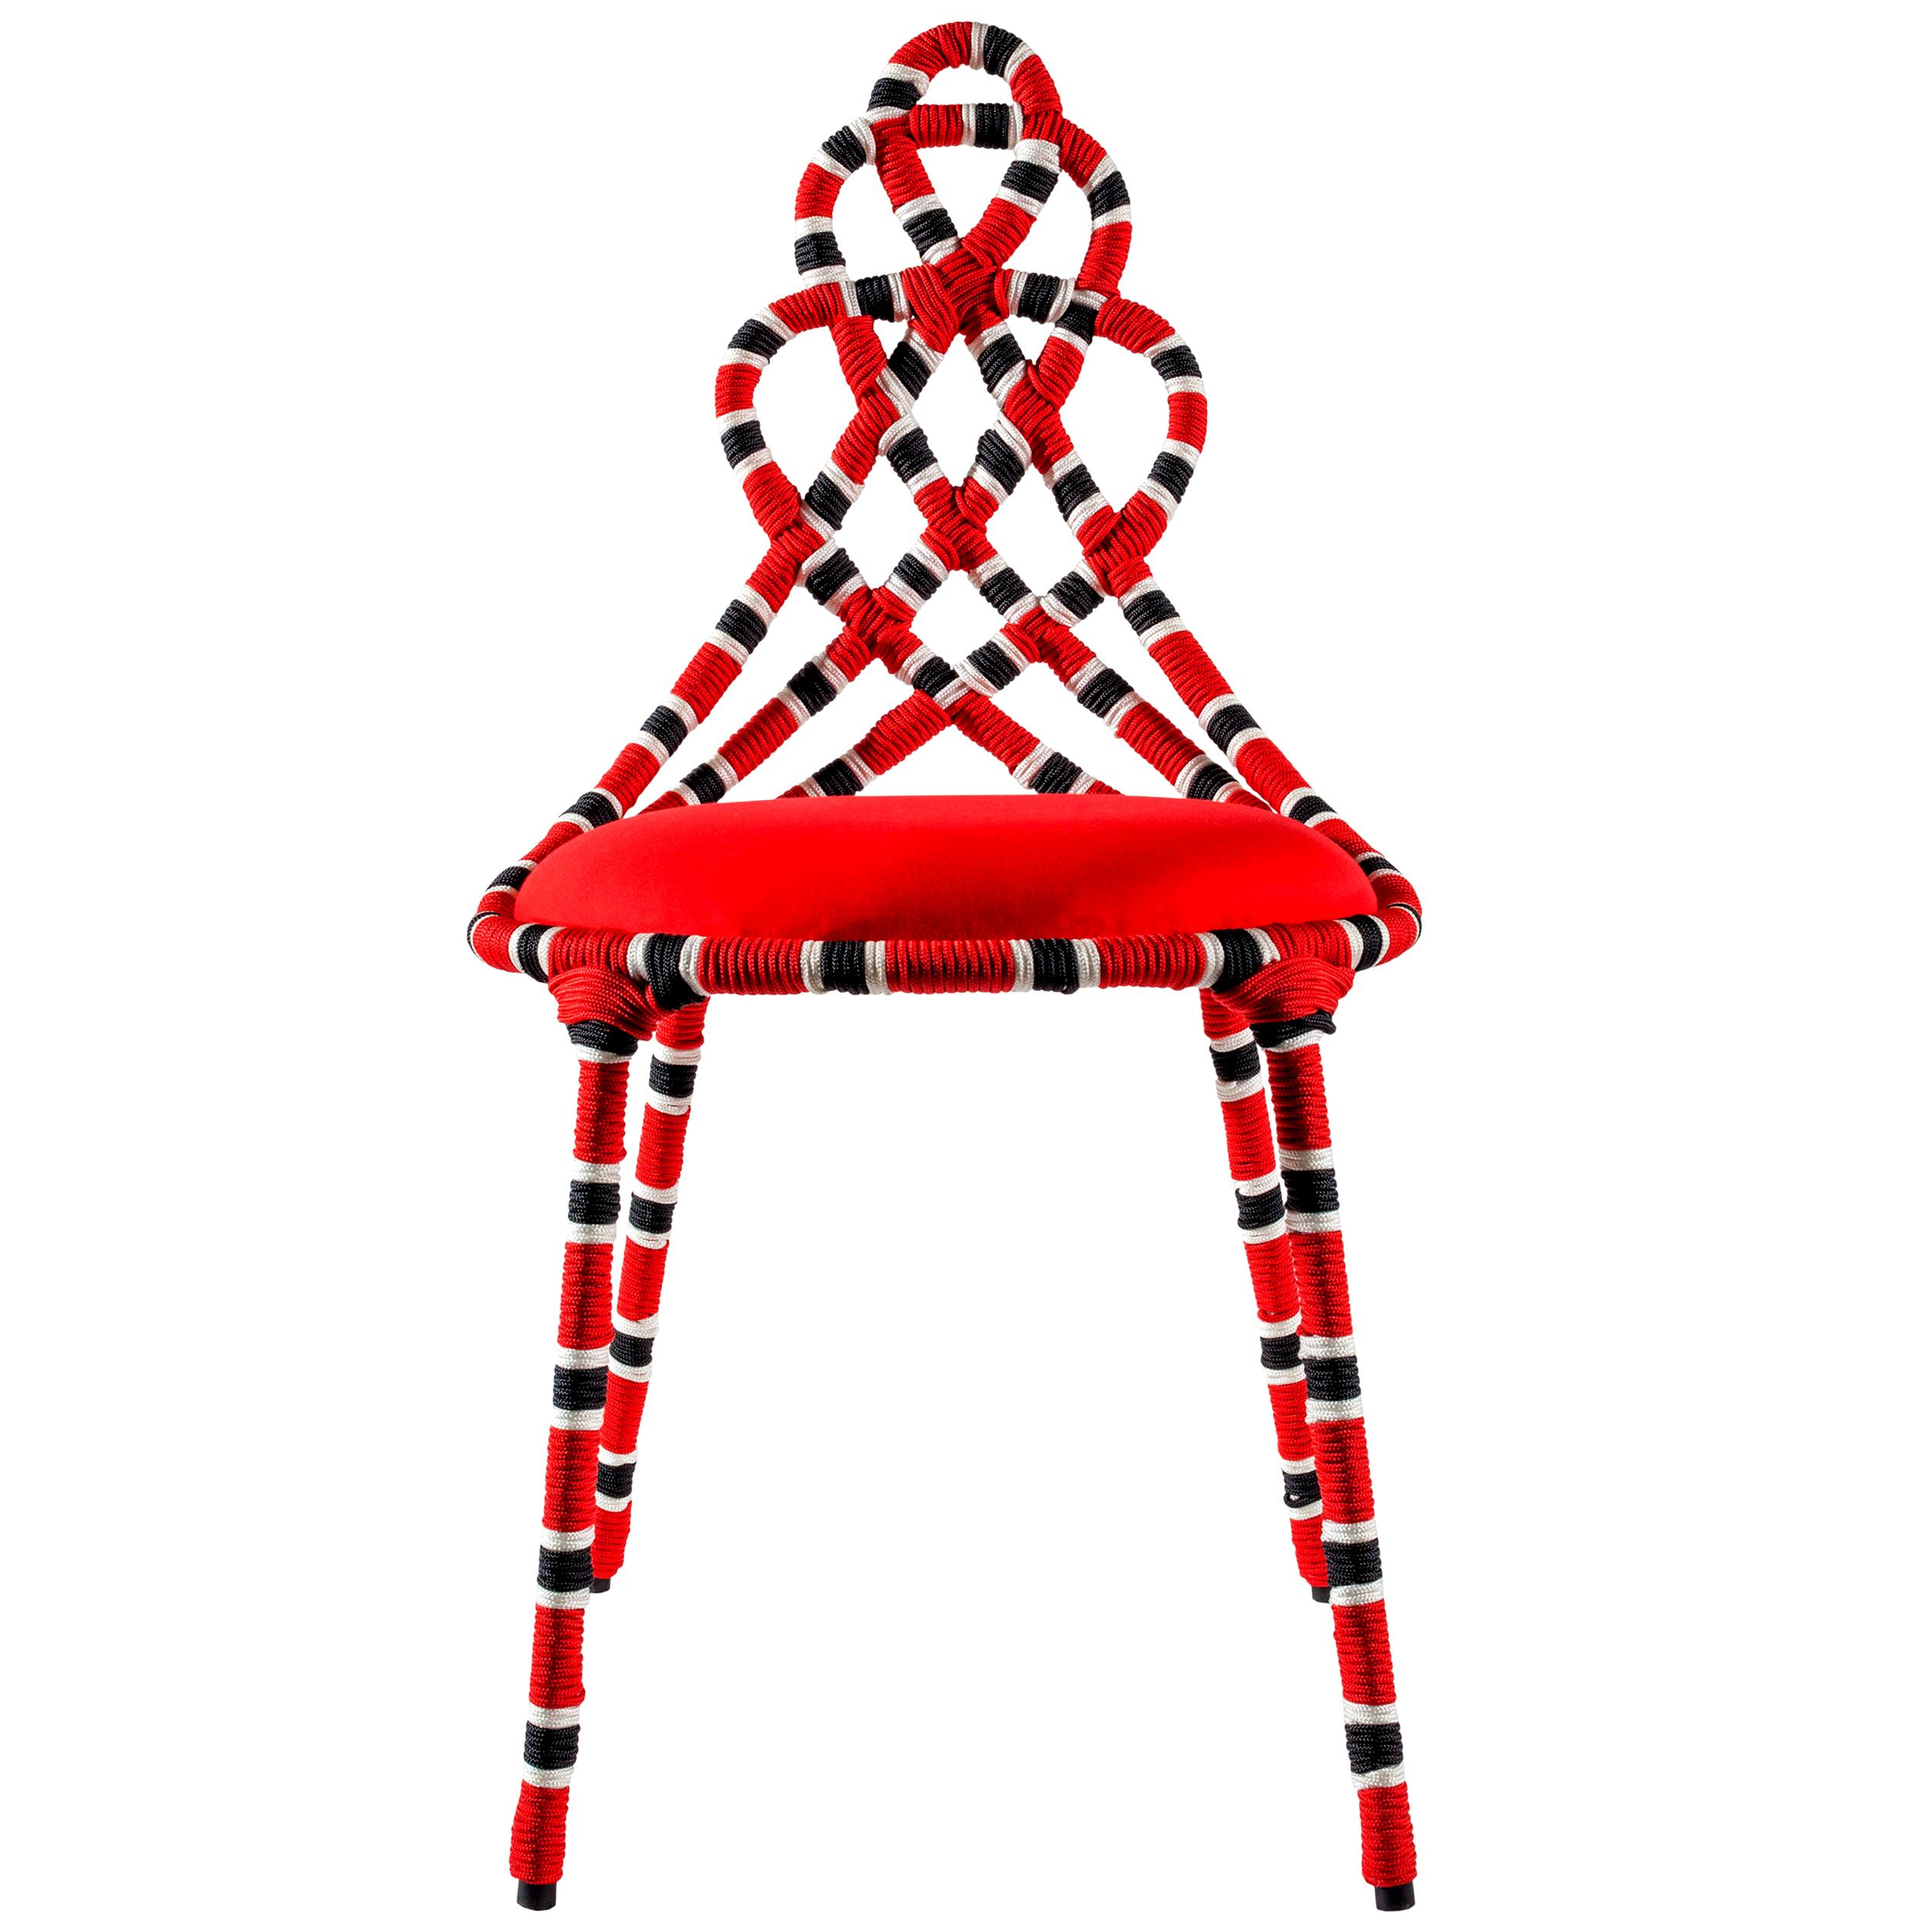 Cobra Coral Chair, Available in NY